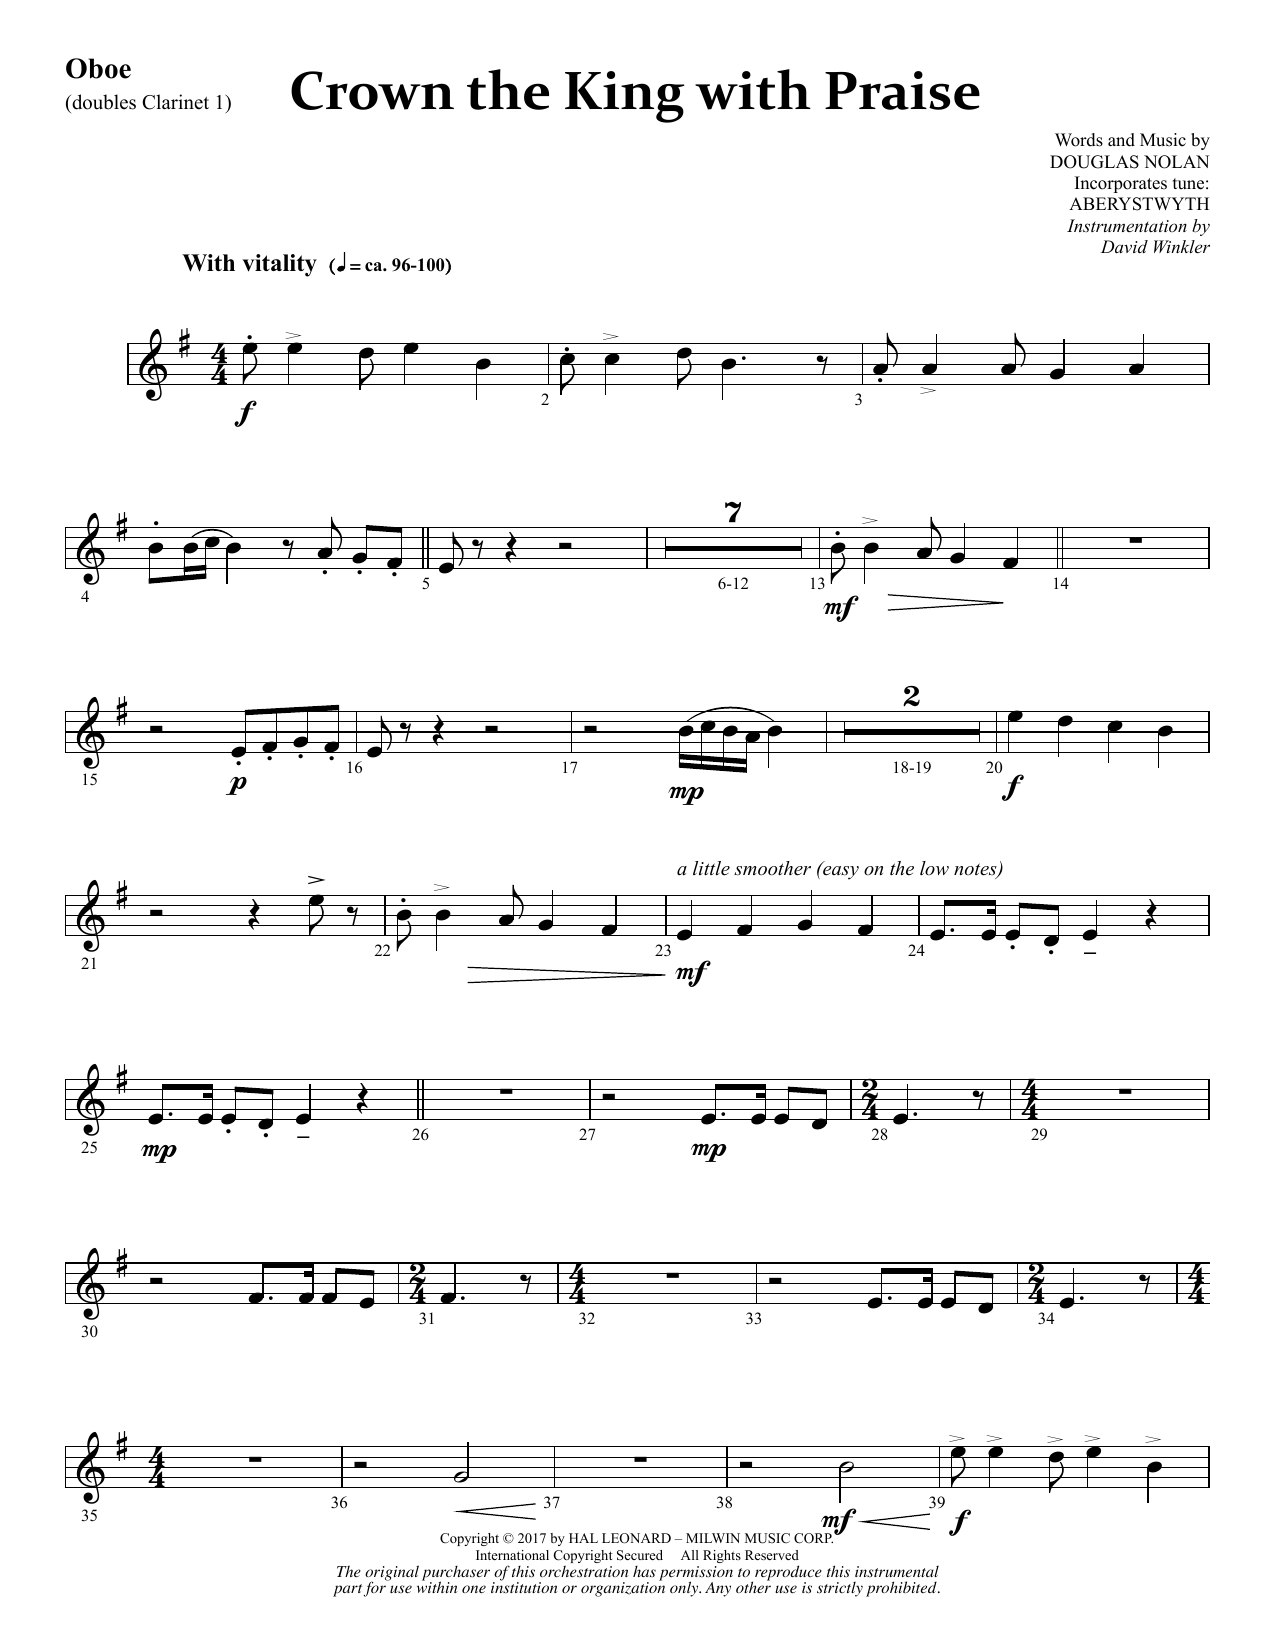 Crown the King with Praise - Oboe (dbl. Clarinet 1) sheet music